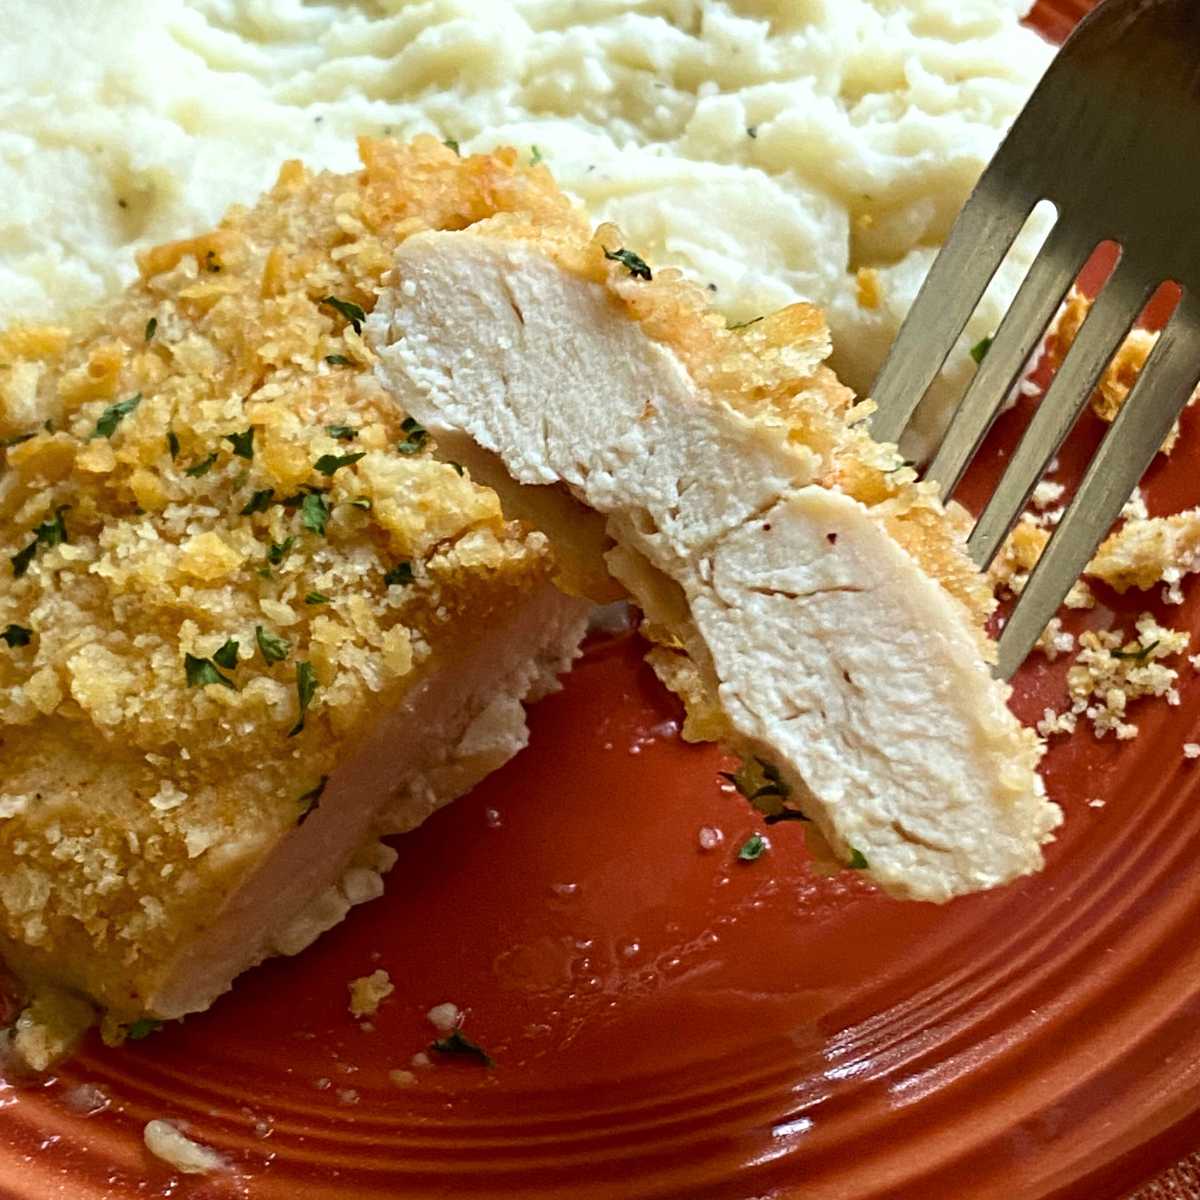 Fork holding a bite of heavenly chicken with the rest of the chicken breast coated with Ritz crackers on the plate with mashed cauliflower.